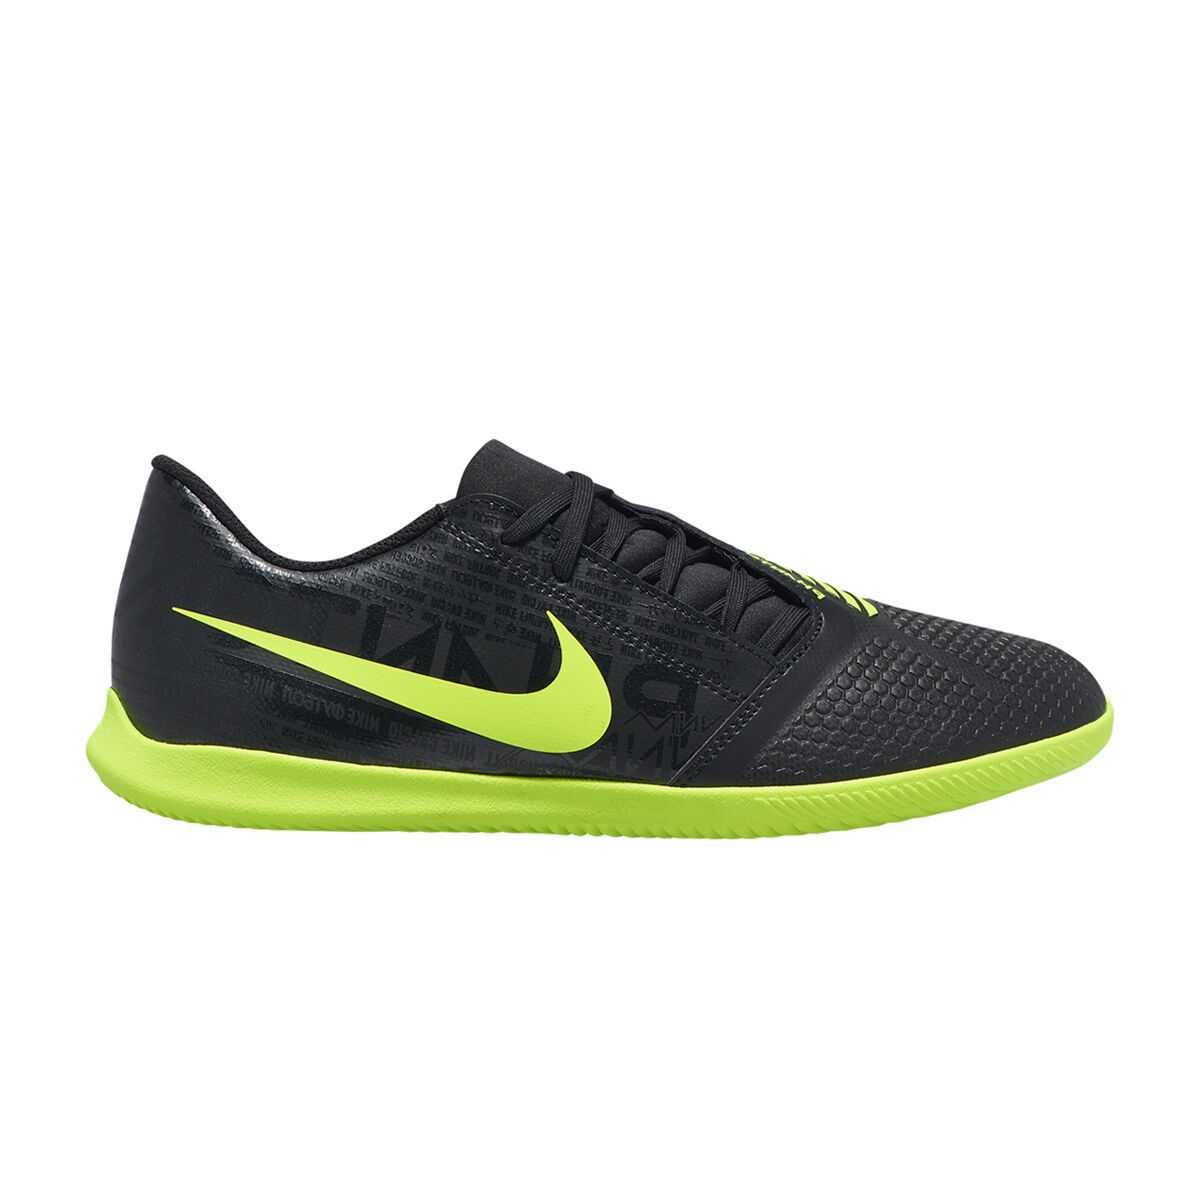 nike 9 indoor soccer shoes